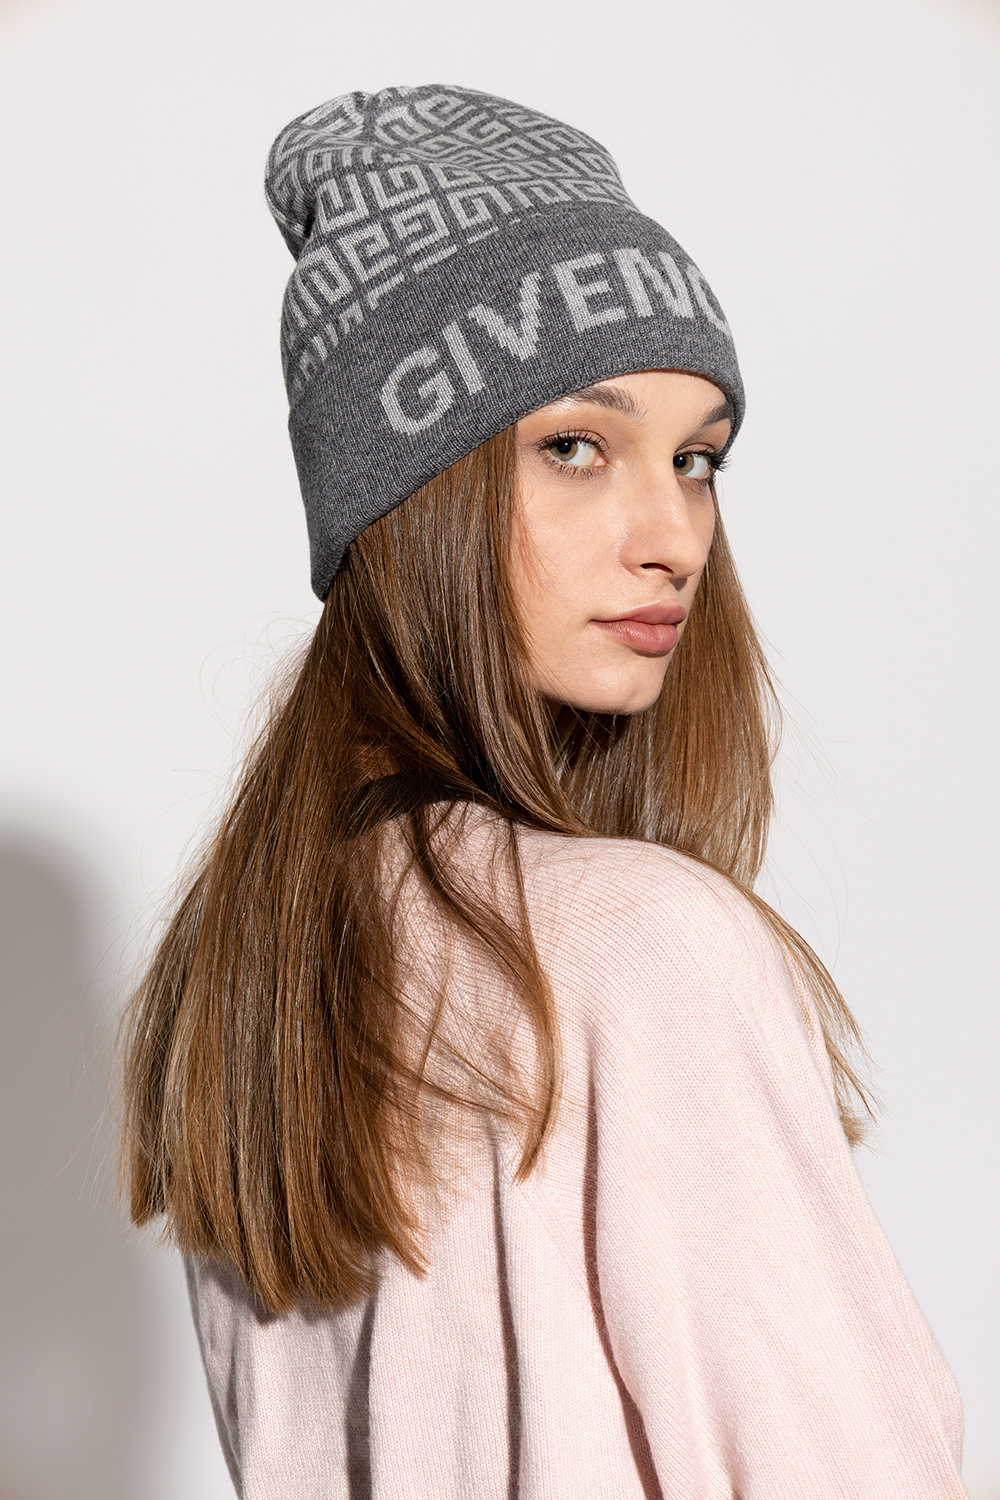 givenchy couture Monogrammed beanie